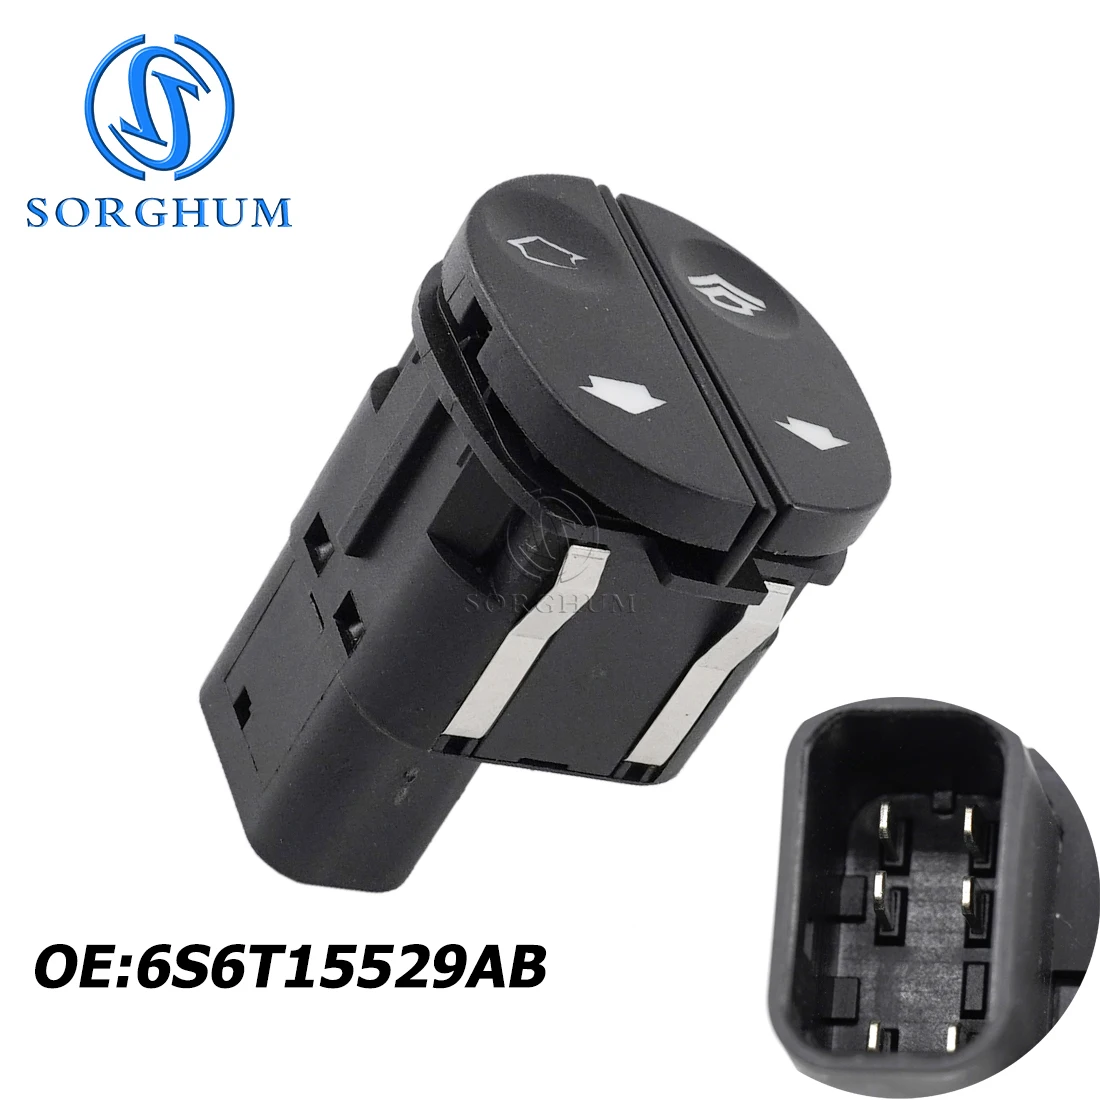 

SORGHUM For Ford Fiesta Fusion KA Puma Transit Connect Power Window Control Switch Lifter Button Car Accessories 6S6T15529AB 6P